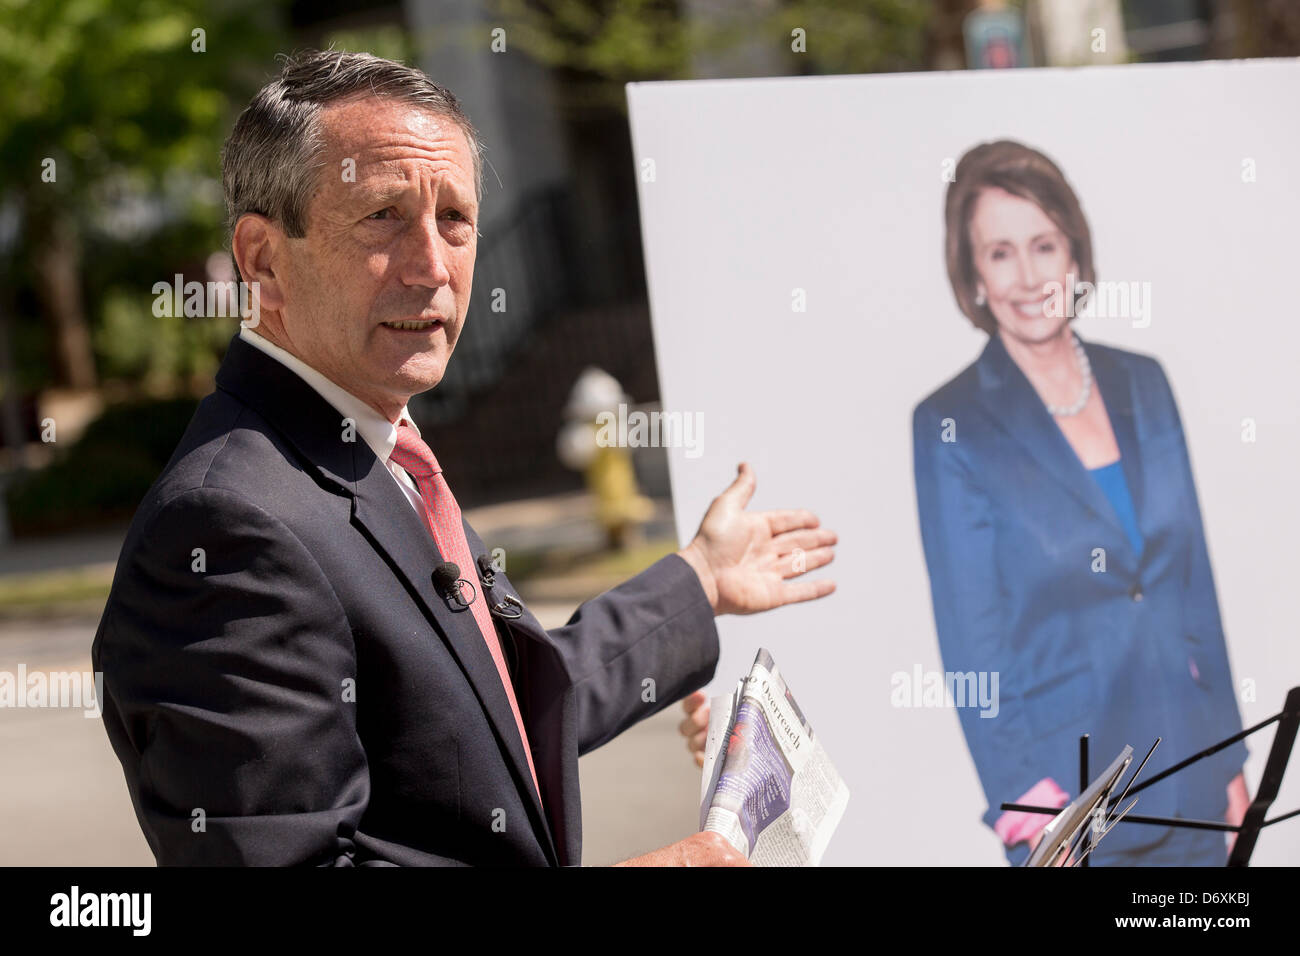 Former South Carolina Governor Mark Sanford debates a cardboard cutout of House Minority Leader Nancy Pelosi during a campaign event on April 24, 2013 in Charleston, South Carolina. Stock Photo